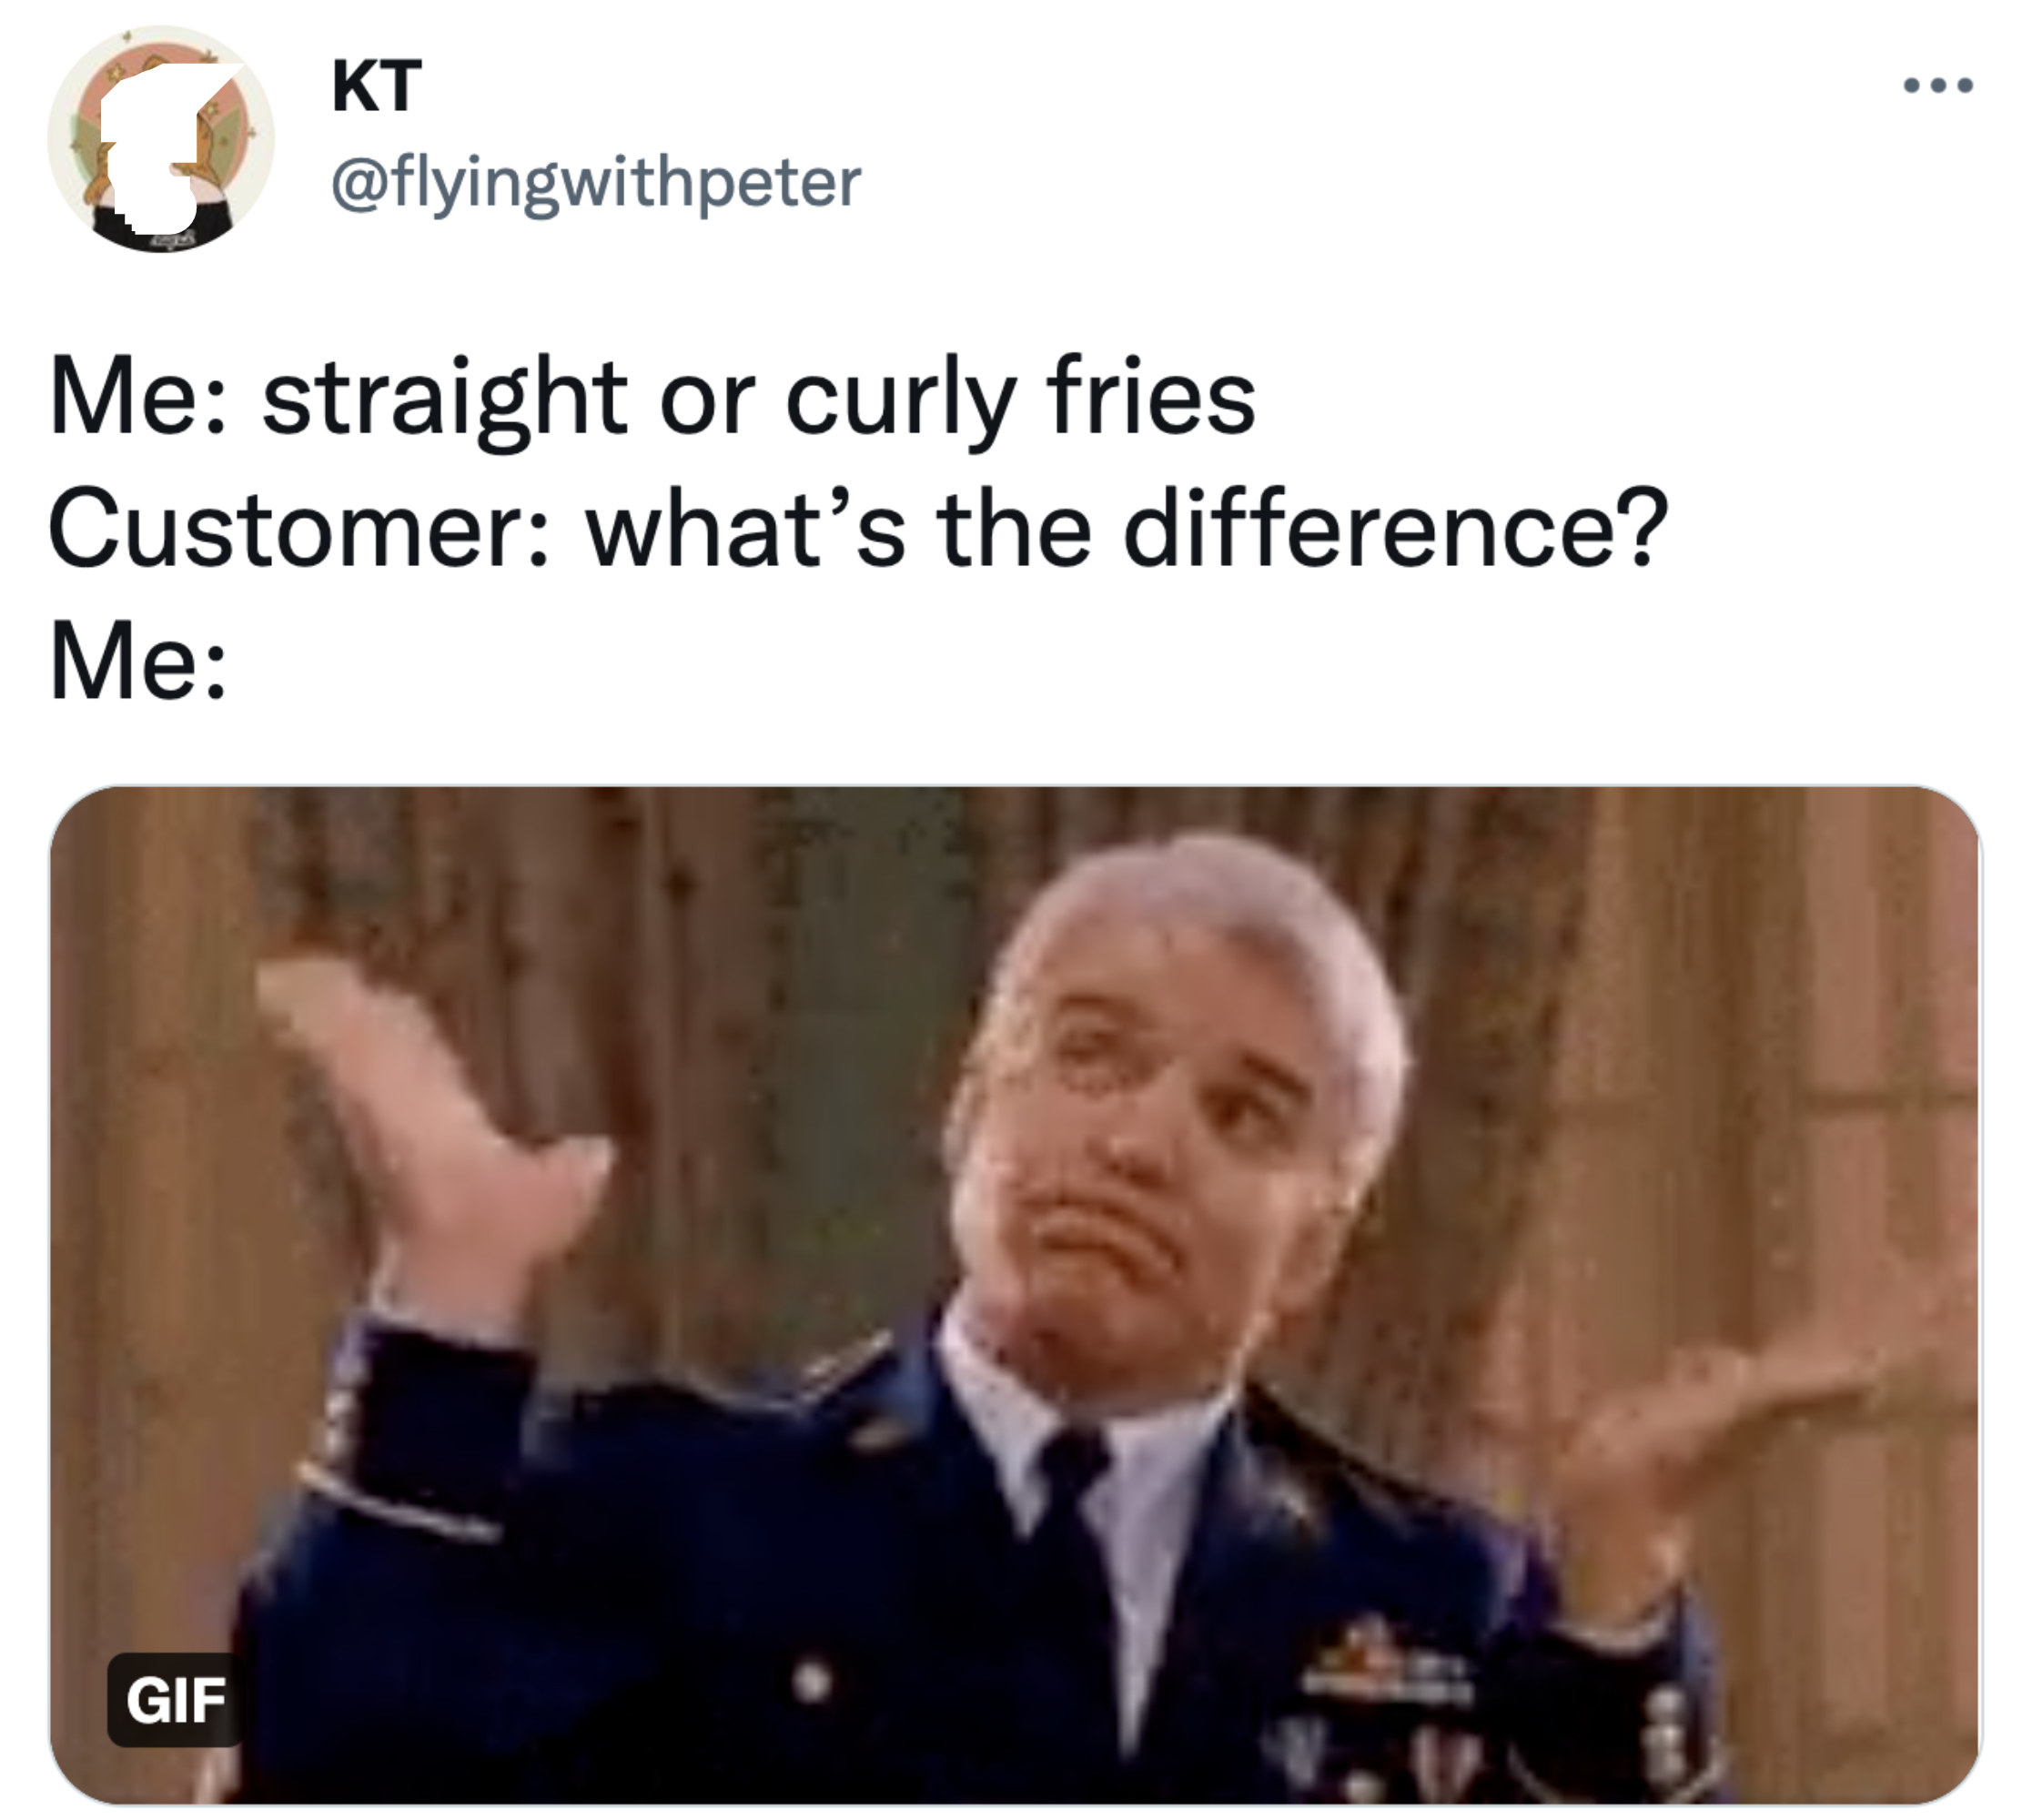 customer not knowing the difference between straight and curly fries